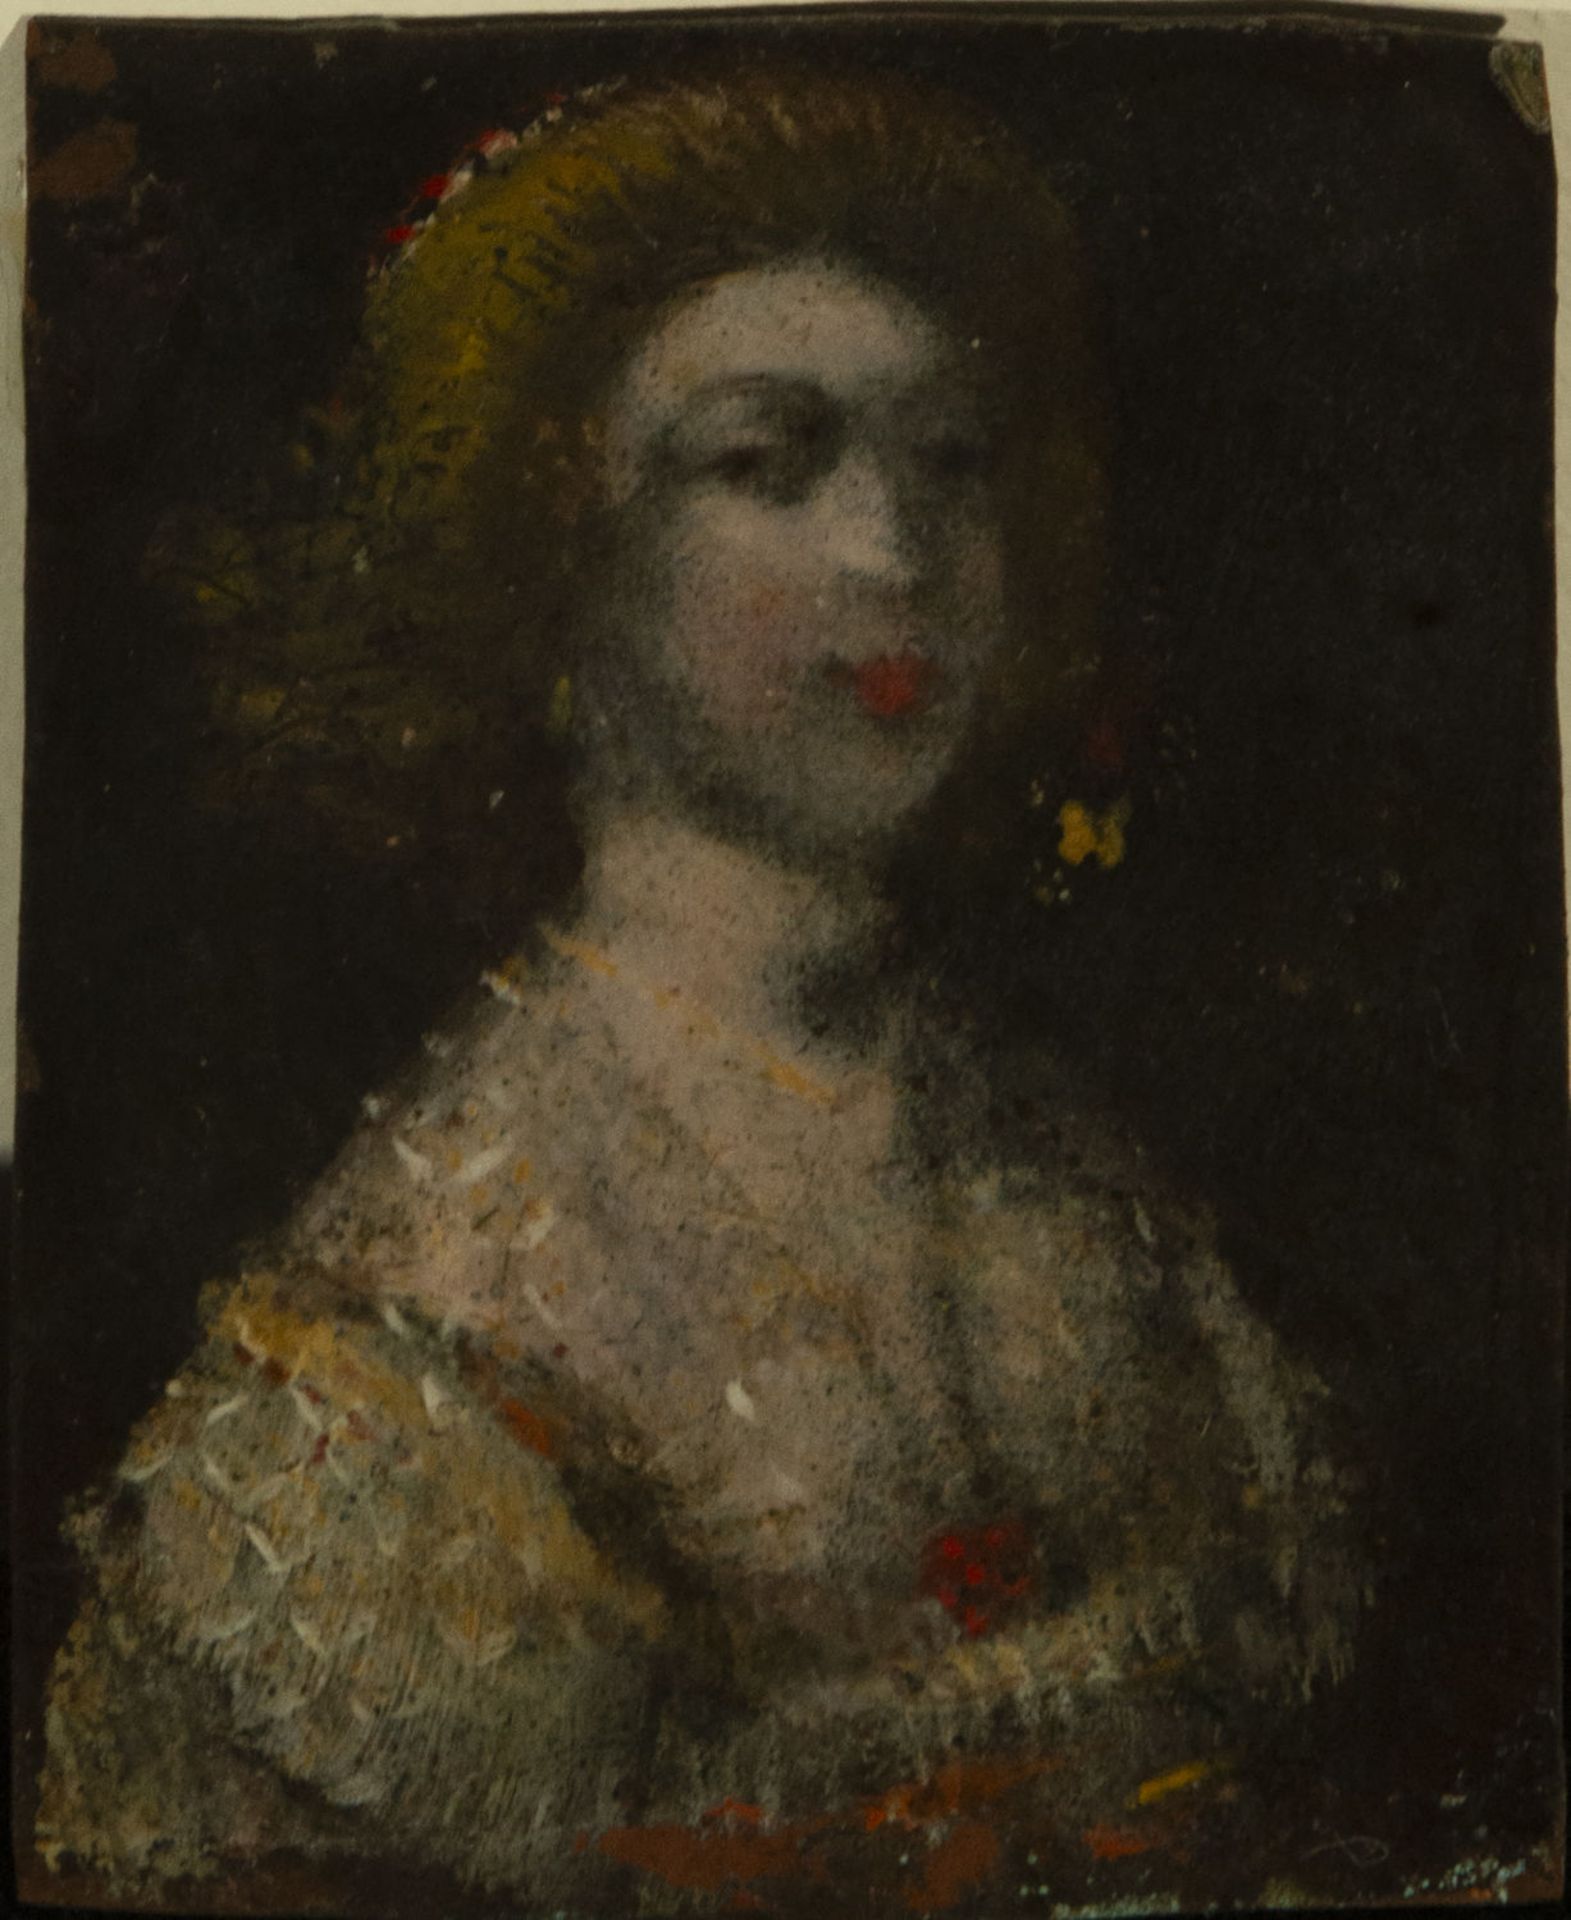 Noble Lady in oil on copper from the 17th century